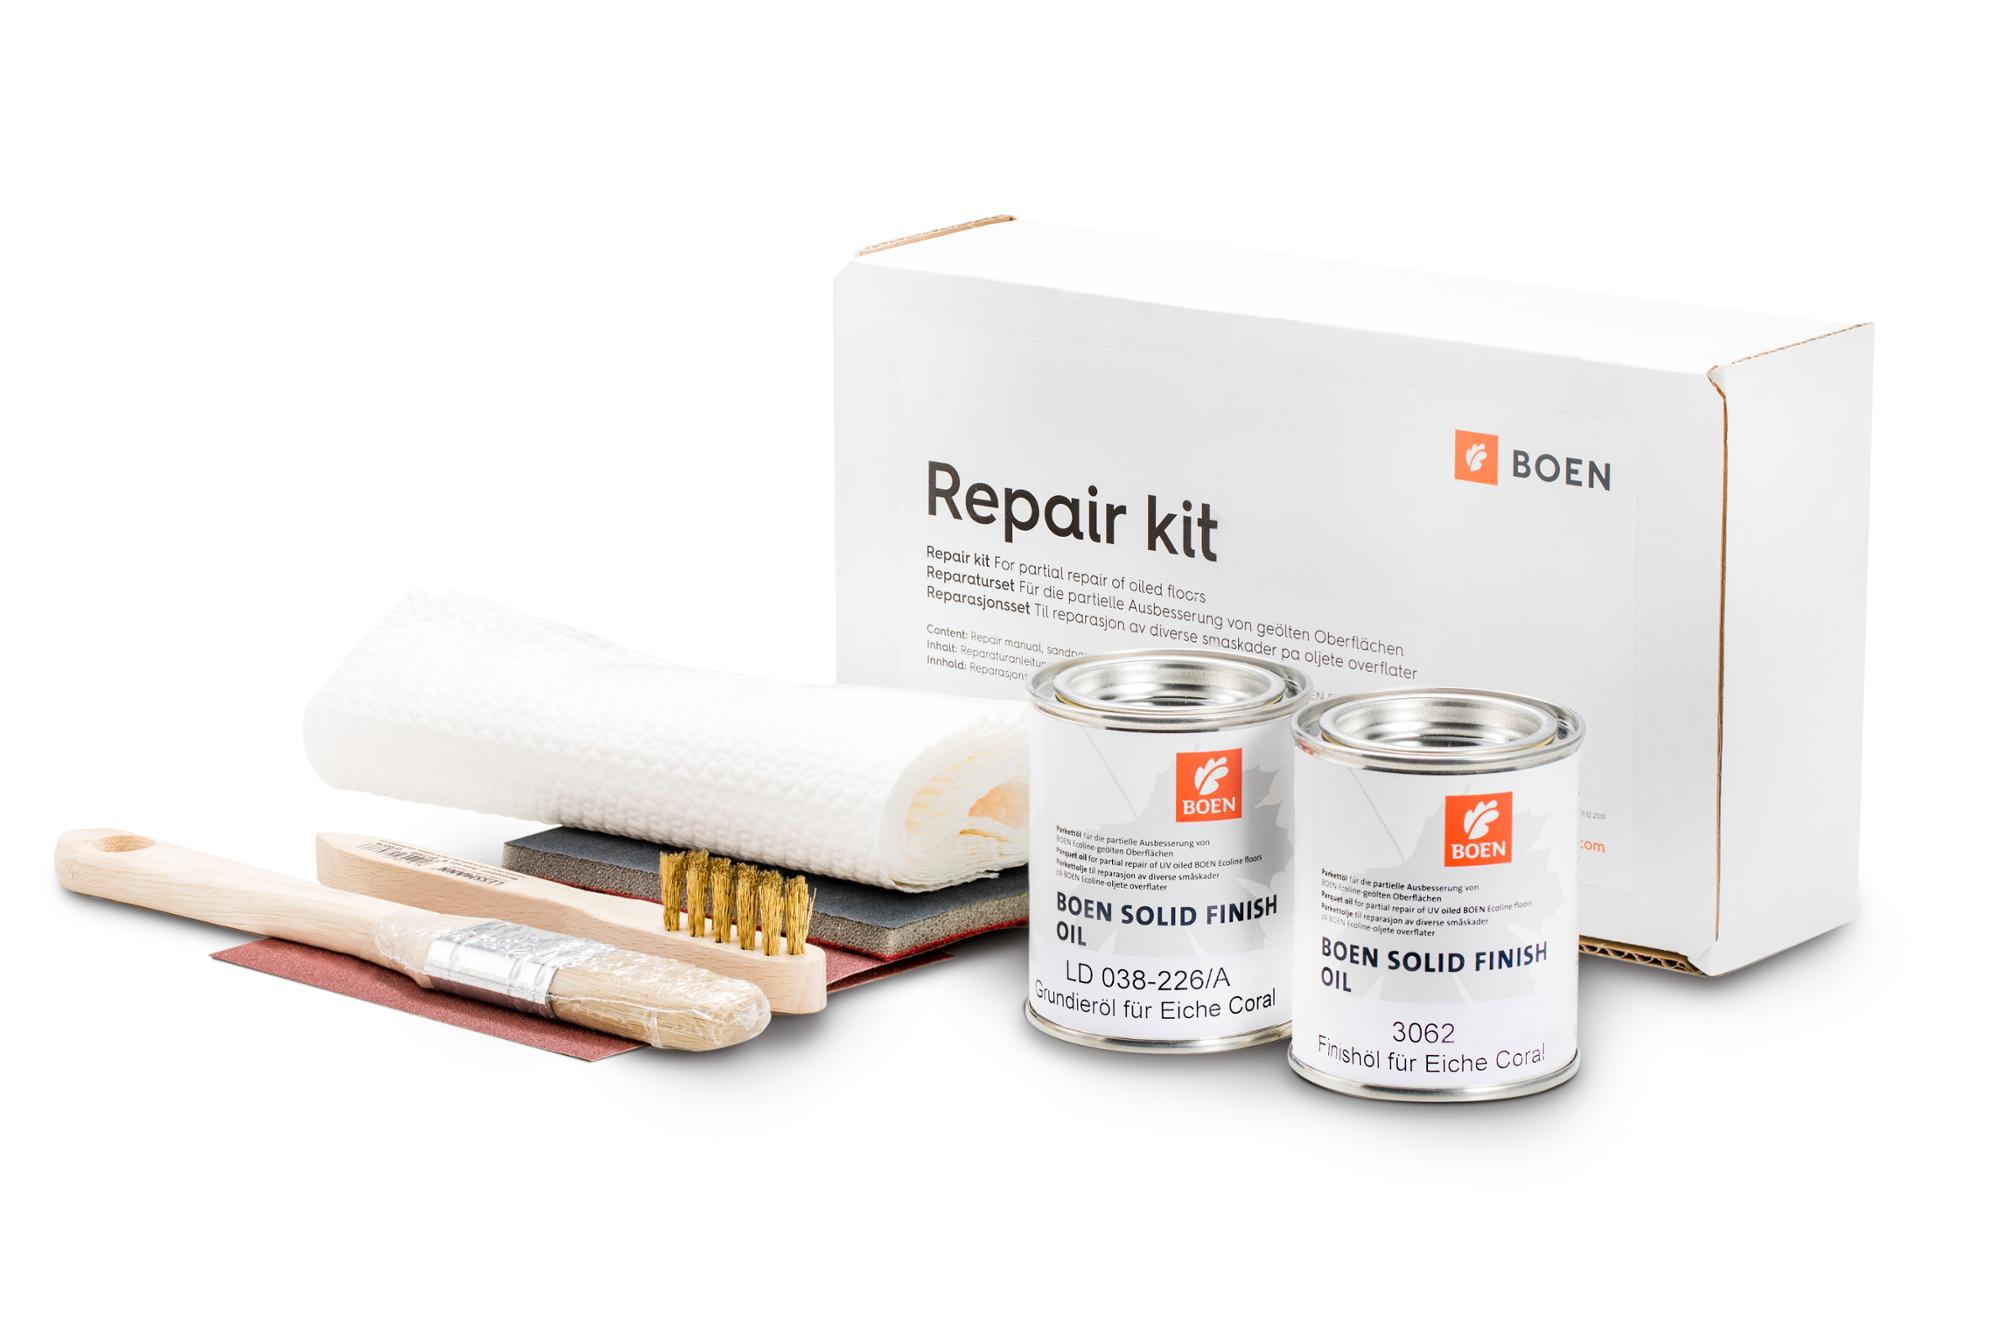 BOEN Repair kit for Oak Coral / White Nights

For the partial repair of natural oiled surfaces.
Content: Repair instruction, abrasive paper P 150,
abrasive web P 360, 0,125 l BOEN Live Natural Oil,
paint brush, cleaning cloths.